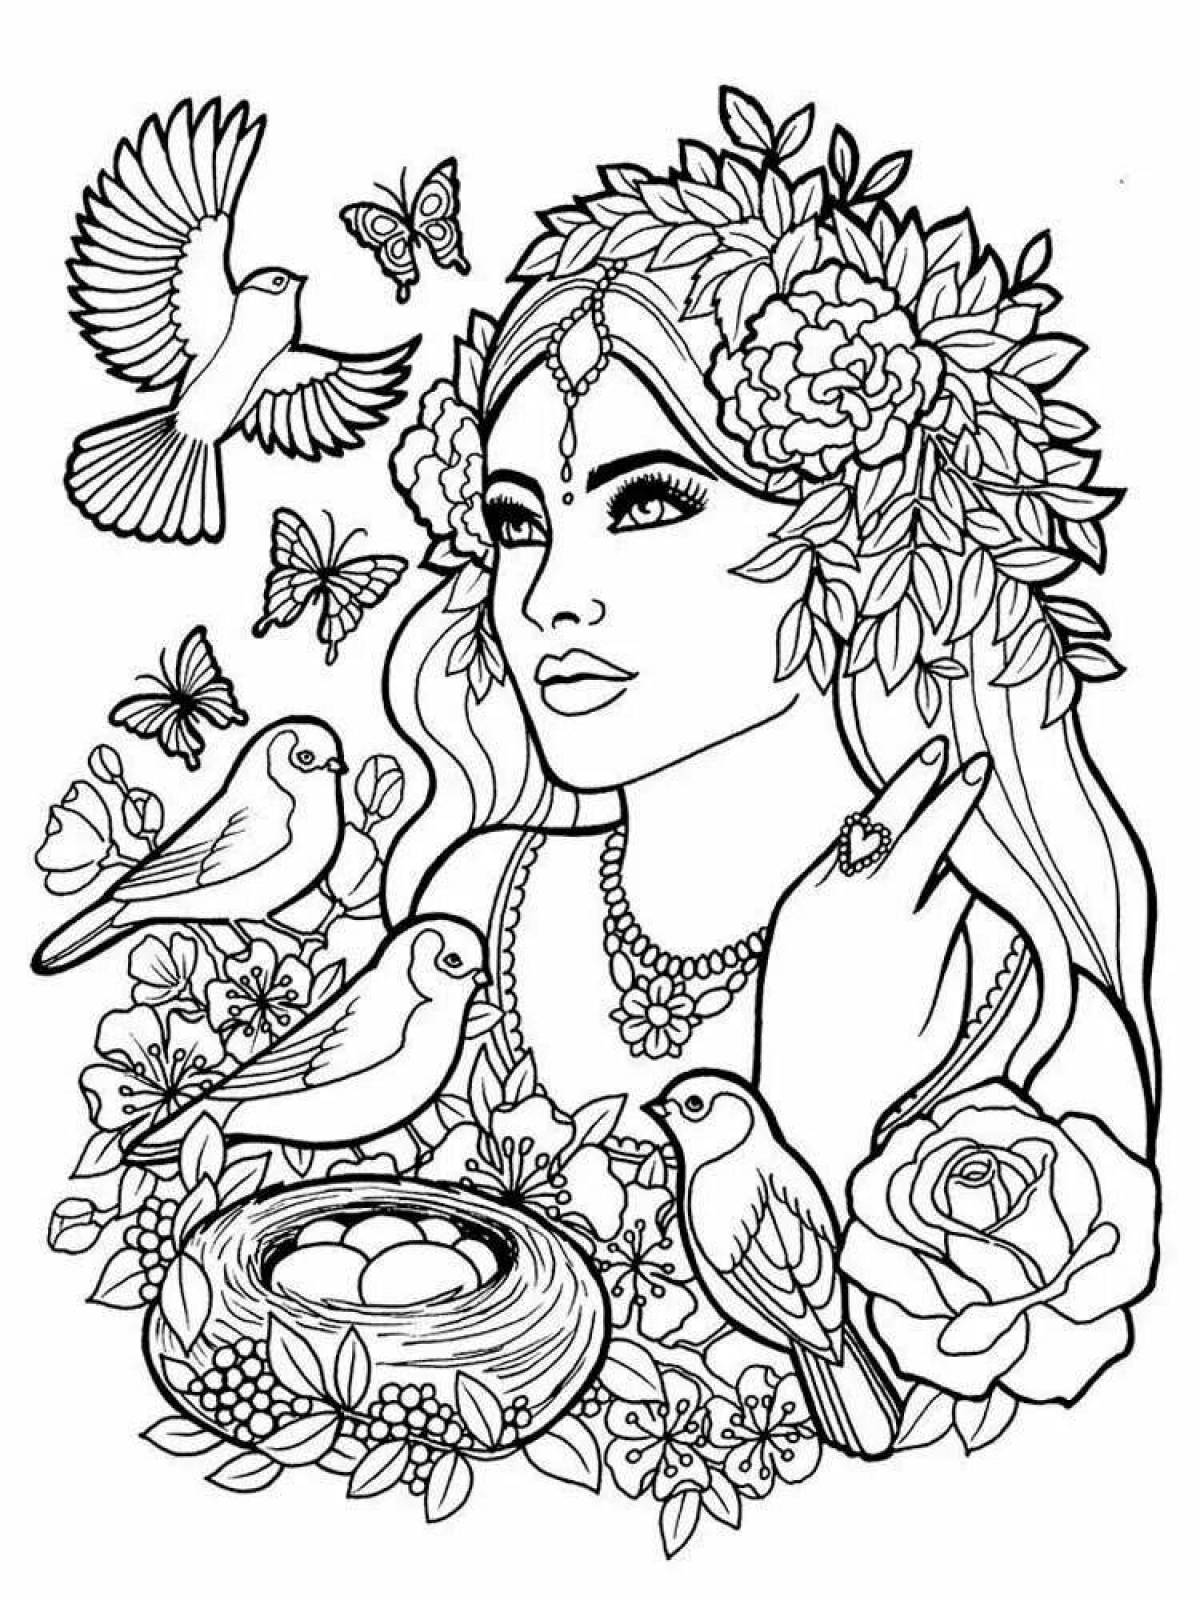 Exquisite antistress girl coloring book